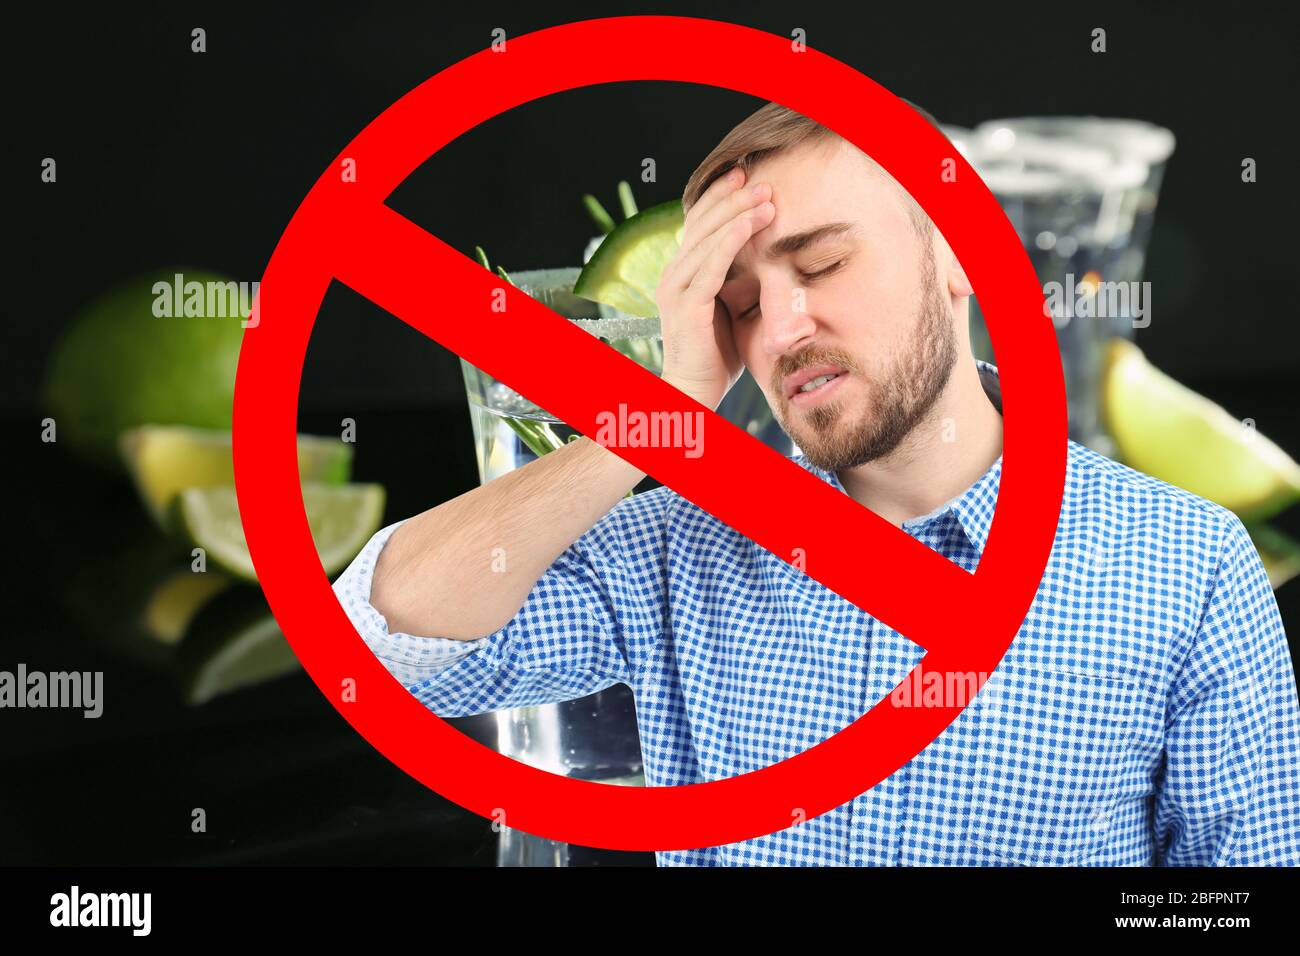 Collage of alcohol drink in glass, young man with headache and STOP sign on black background Stock Photo